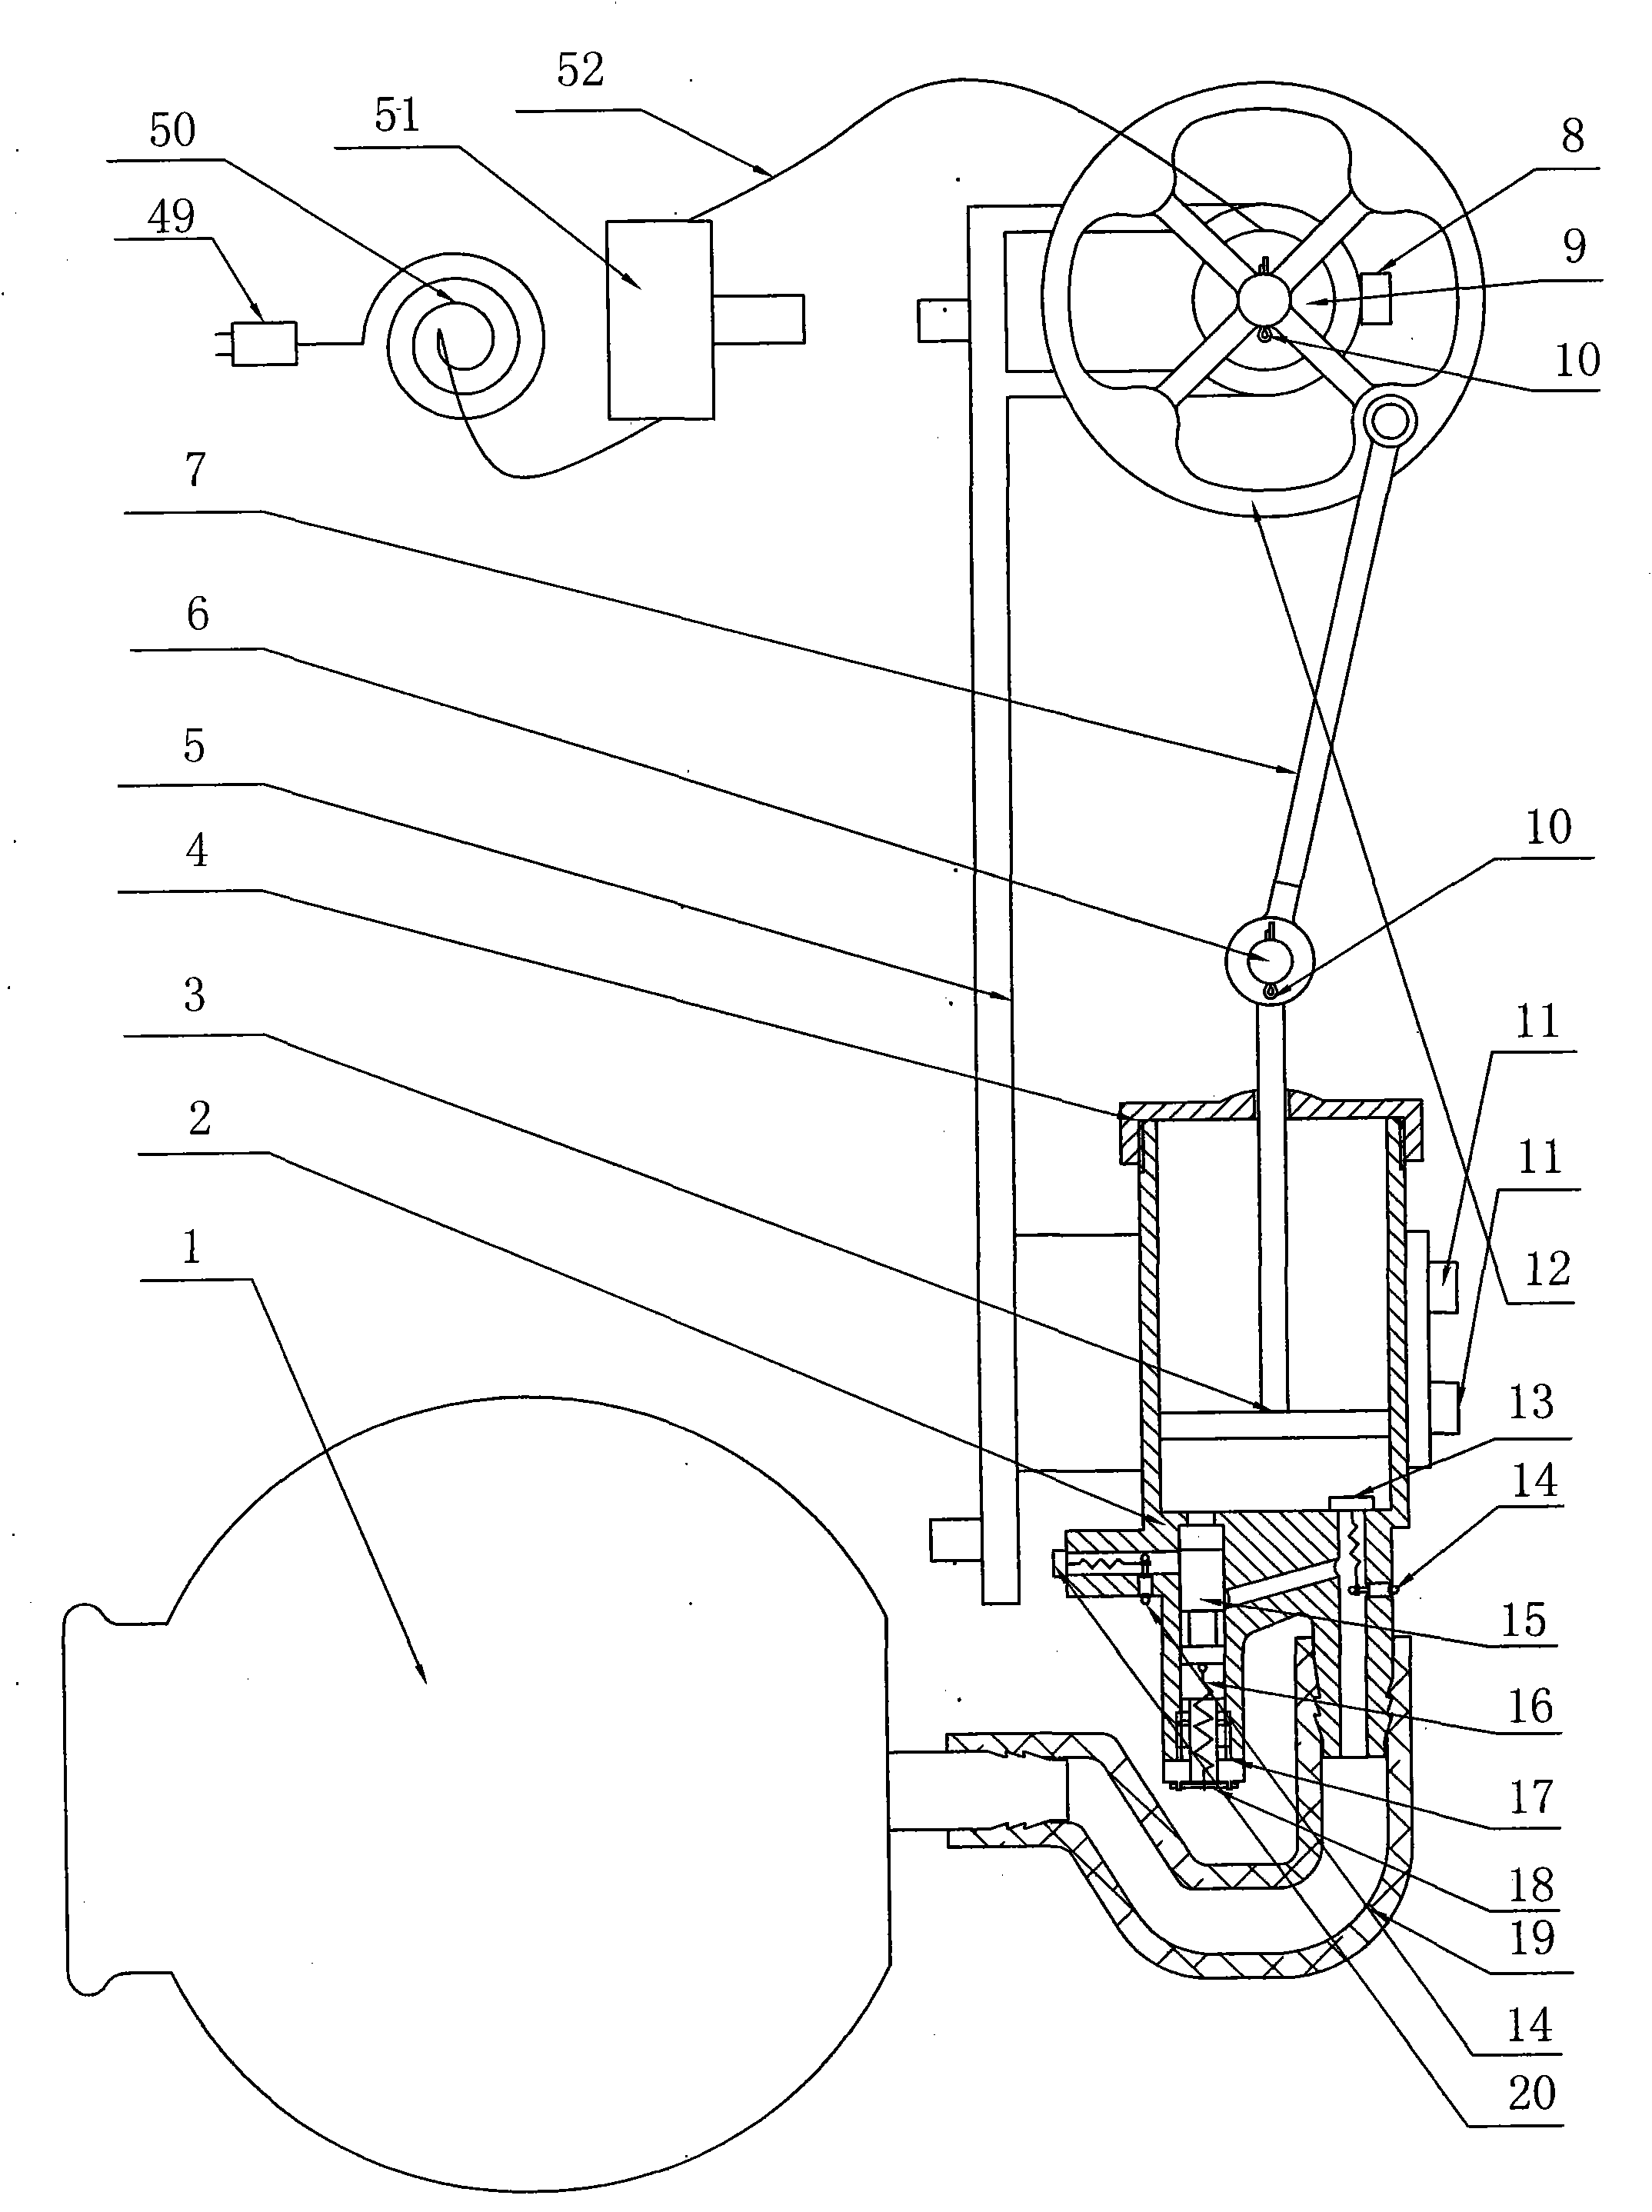 Pulse variable-pressure cupping device